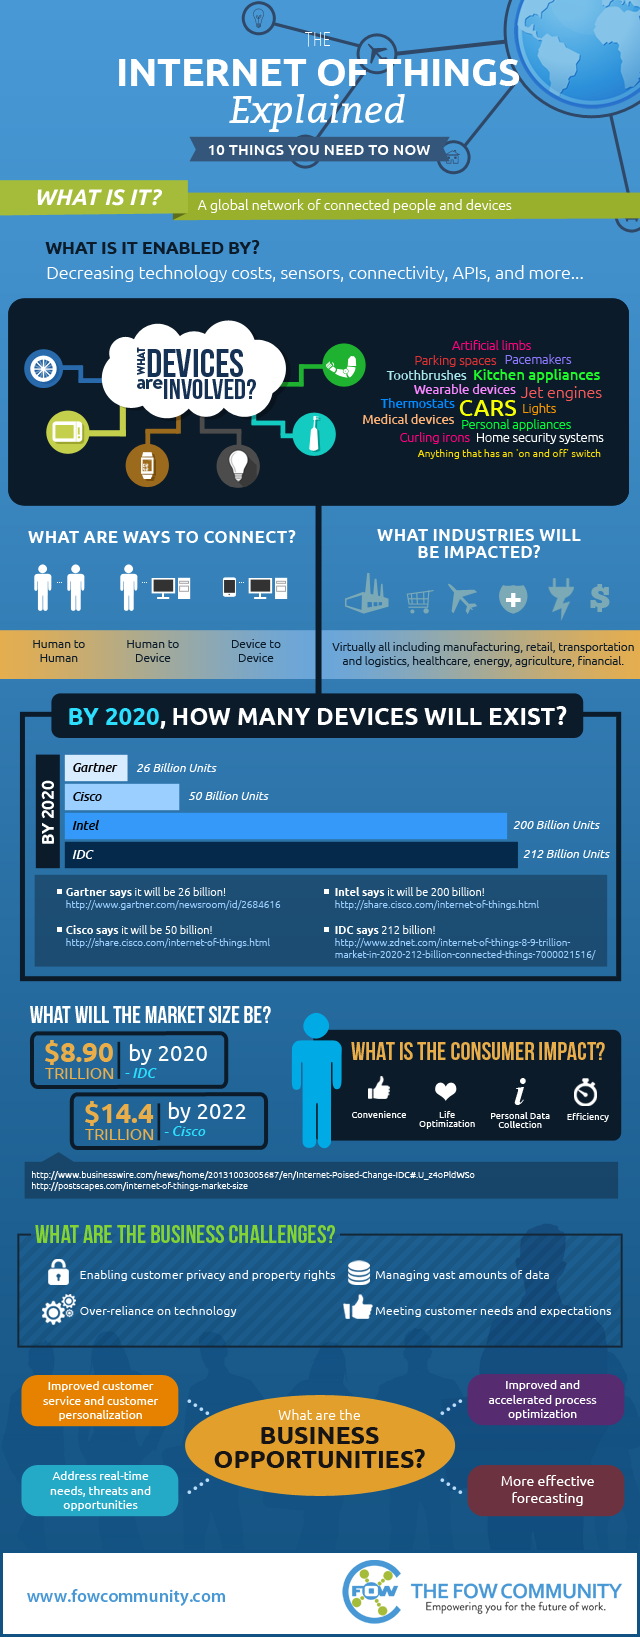 Pic_2 - The-Internet-of-Things-Infographic-06